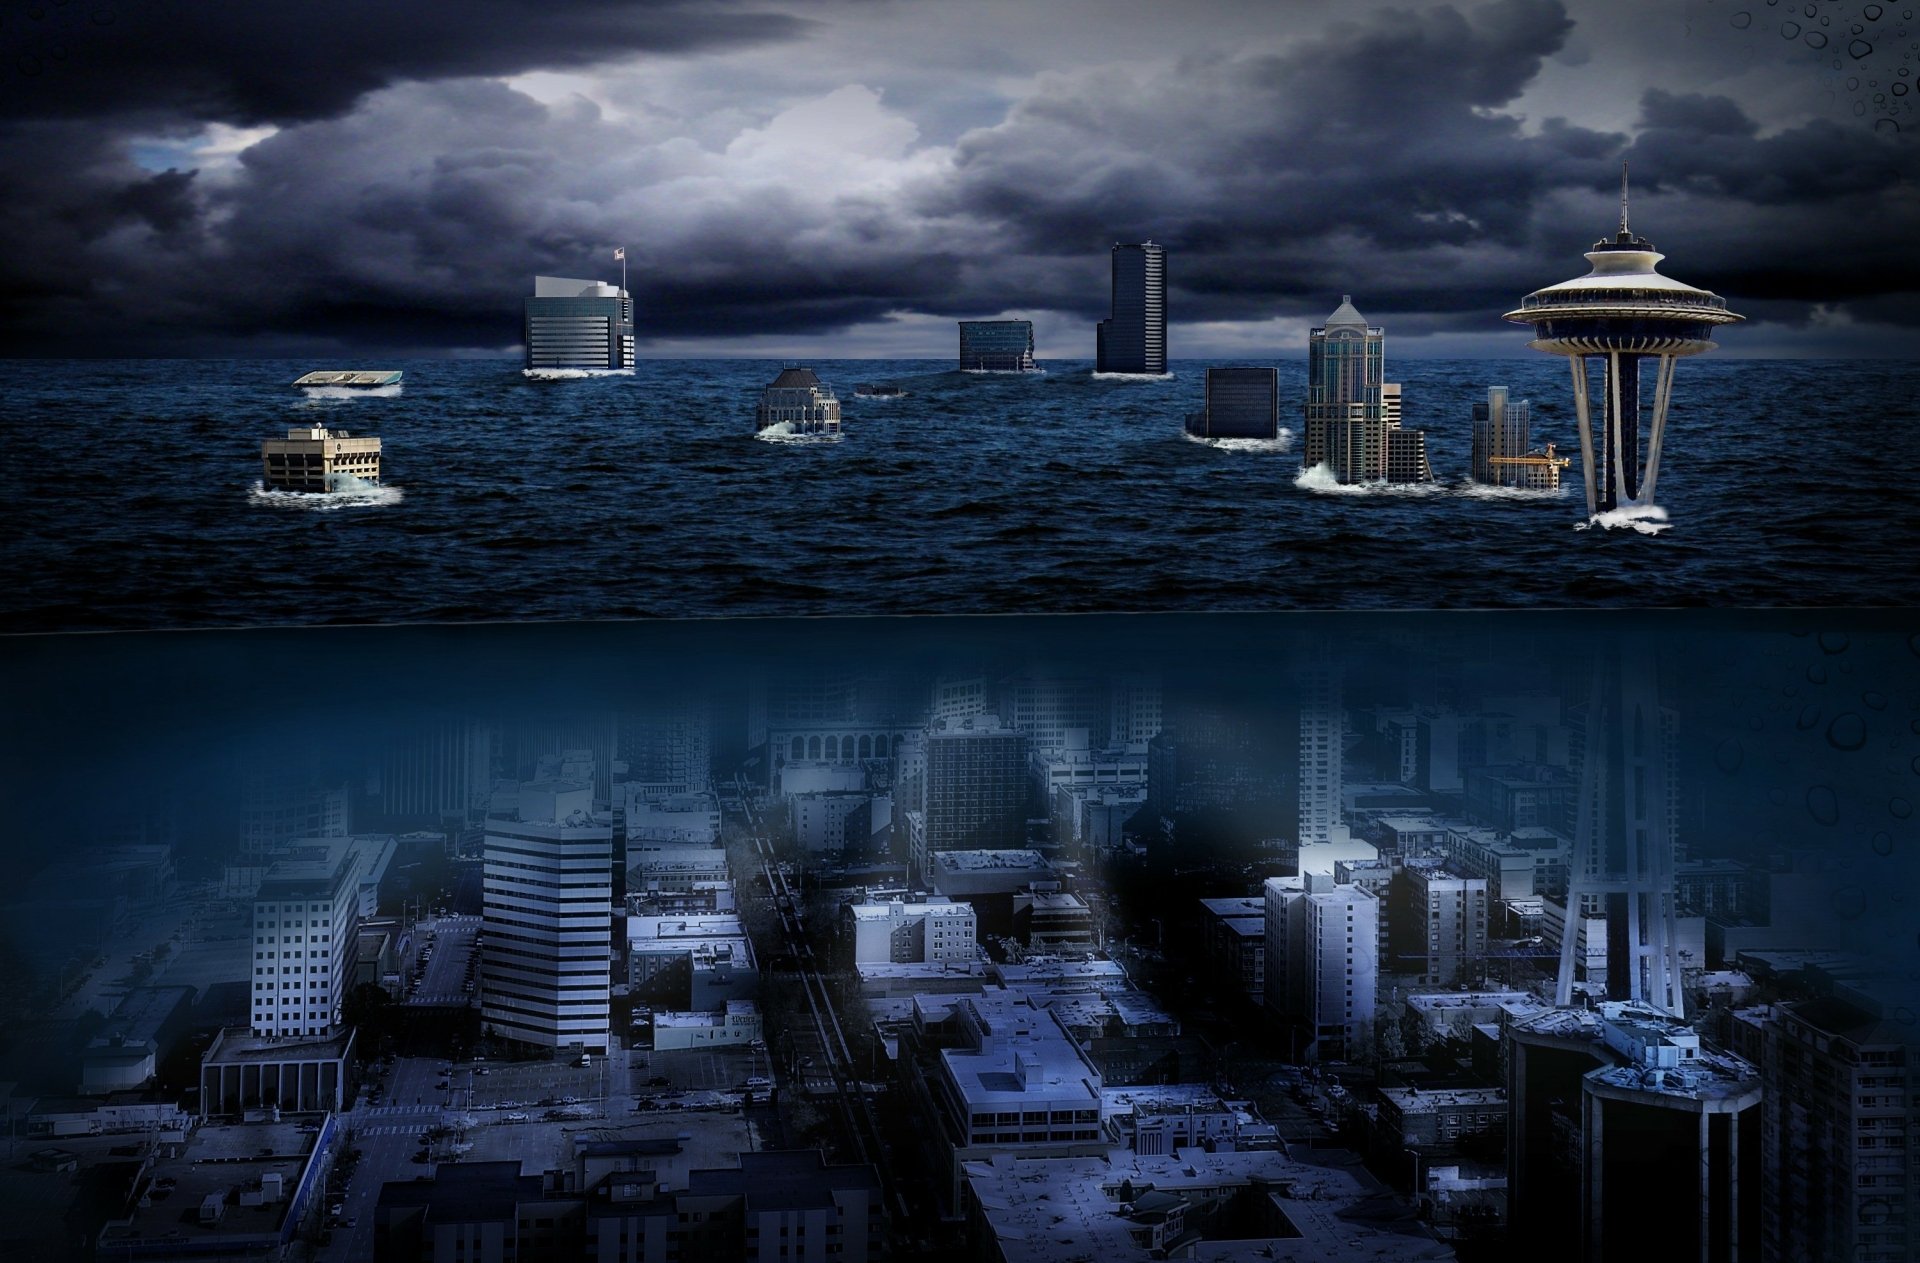 A post-apocalyptic Sci Fi view of Seattle skyline under a dramatic, apocalyptic sky, meeting the ocean in a haunting HD desktop wallpaper.